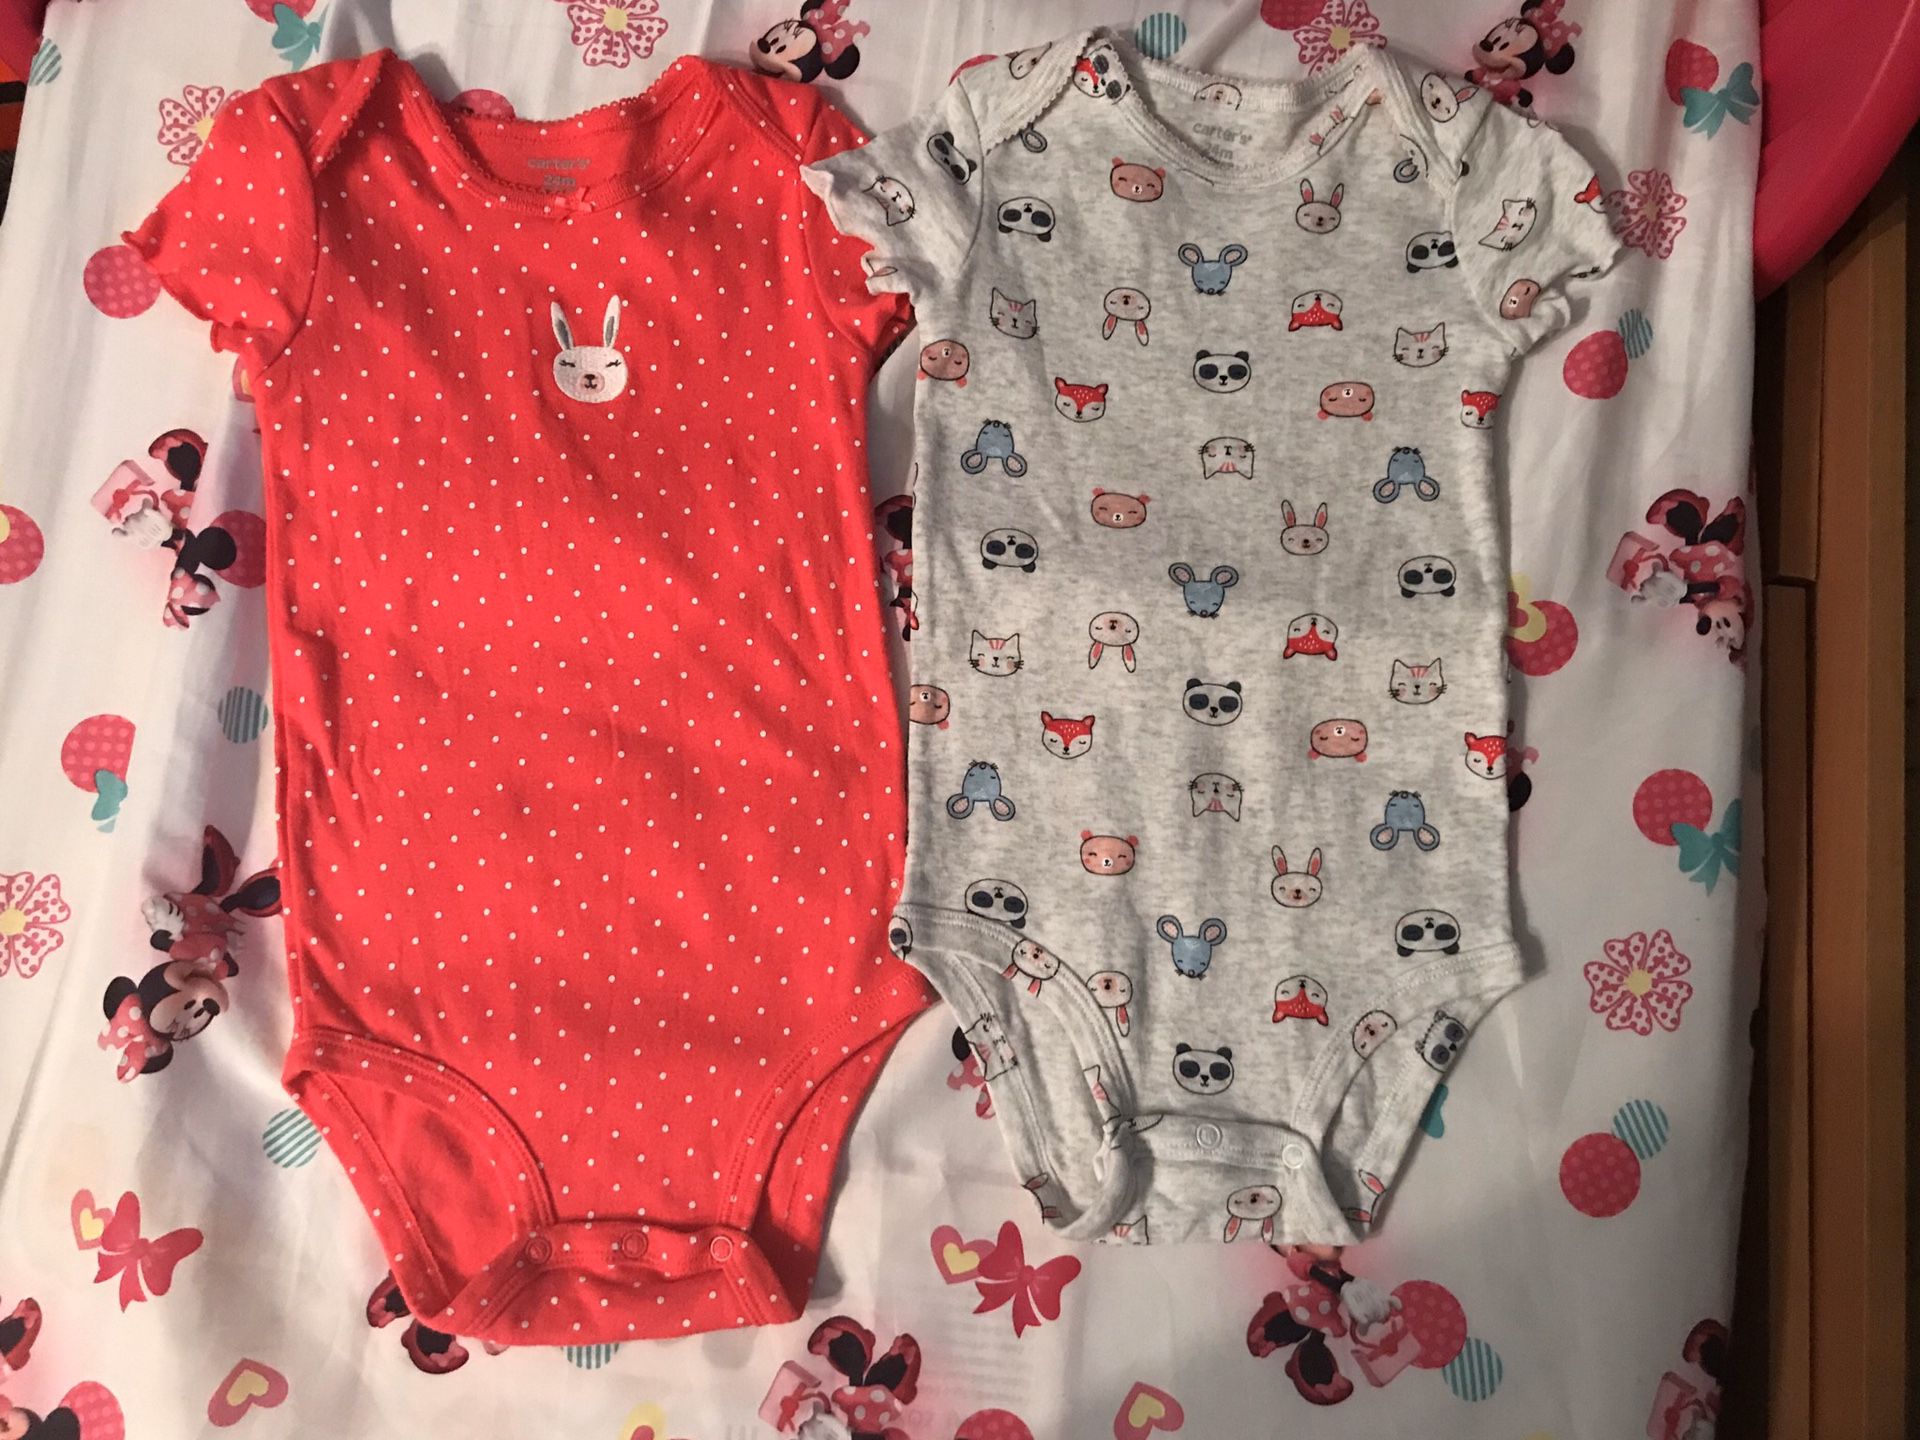 Baby Girl Bodysuits and matching pants size 24 months